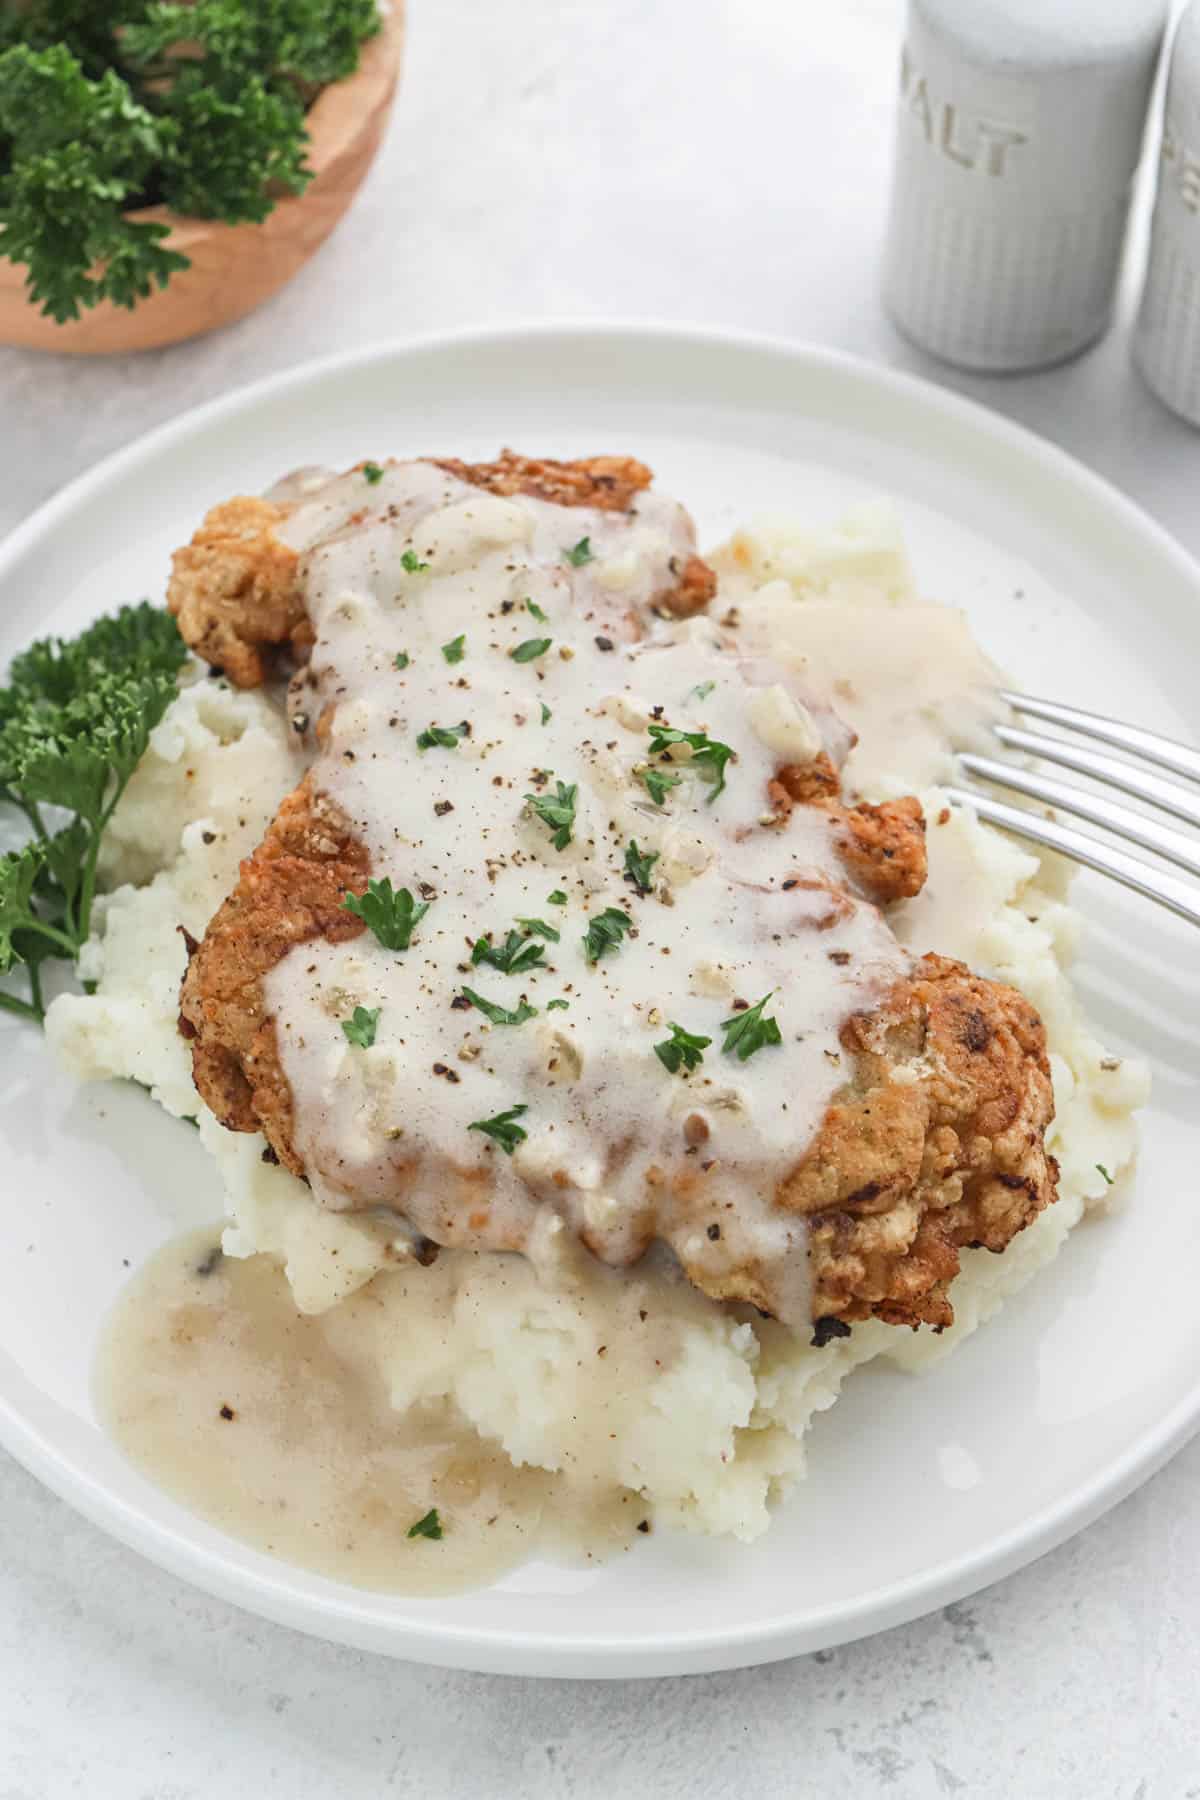 A plate of chicken fried steak on a bed of mashed potatoes covered in white gravy